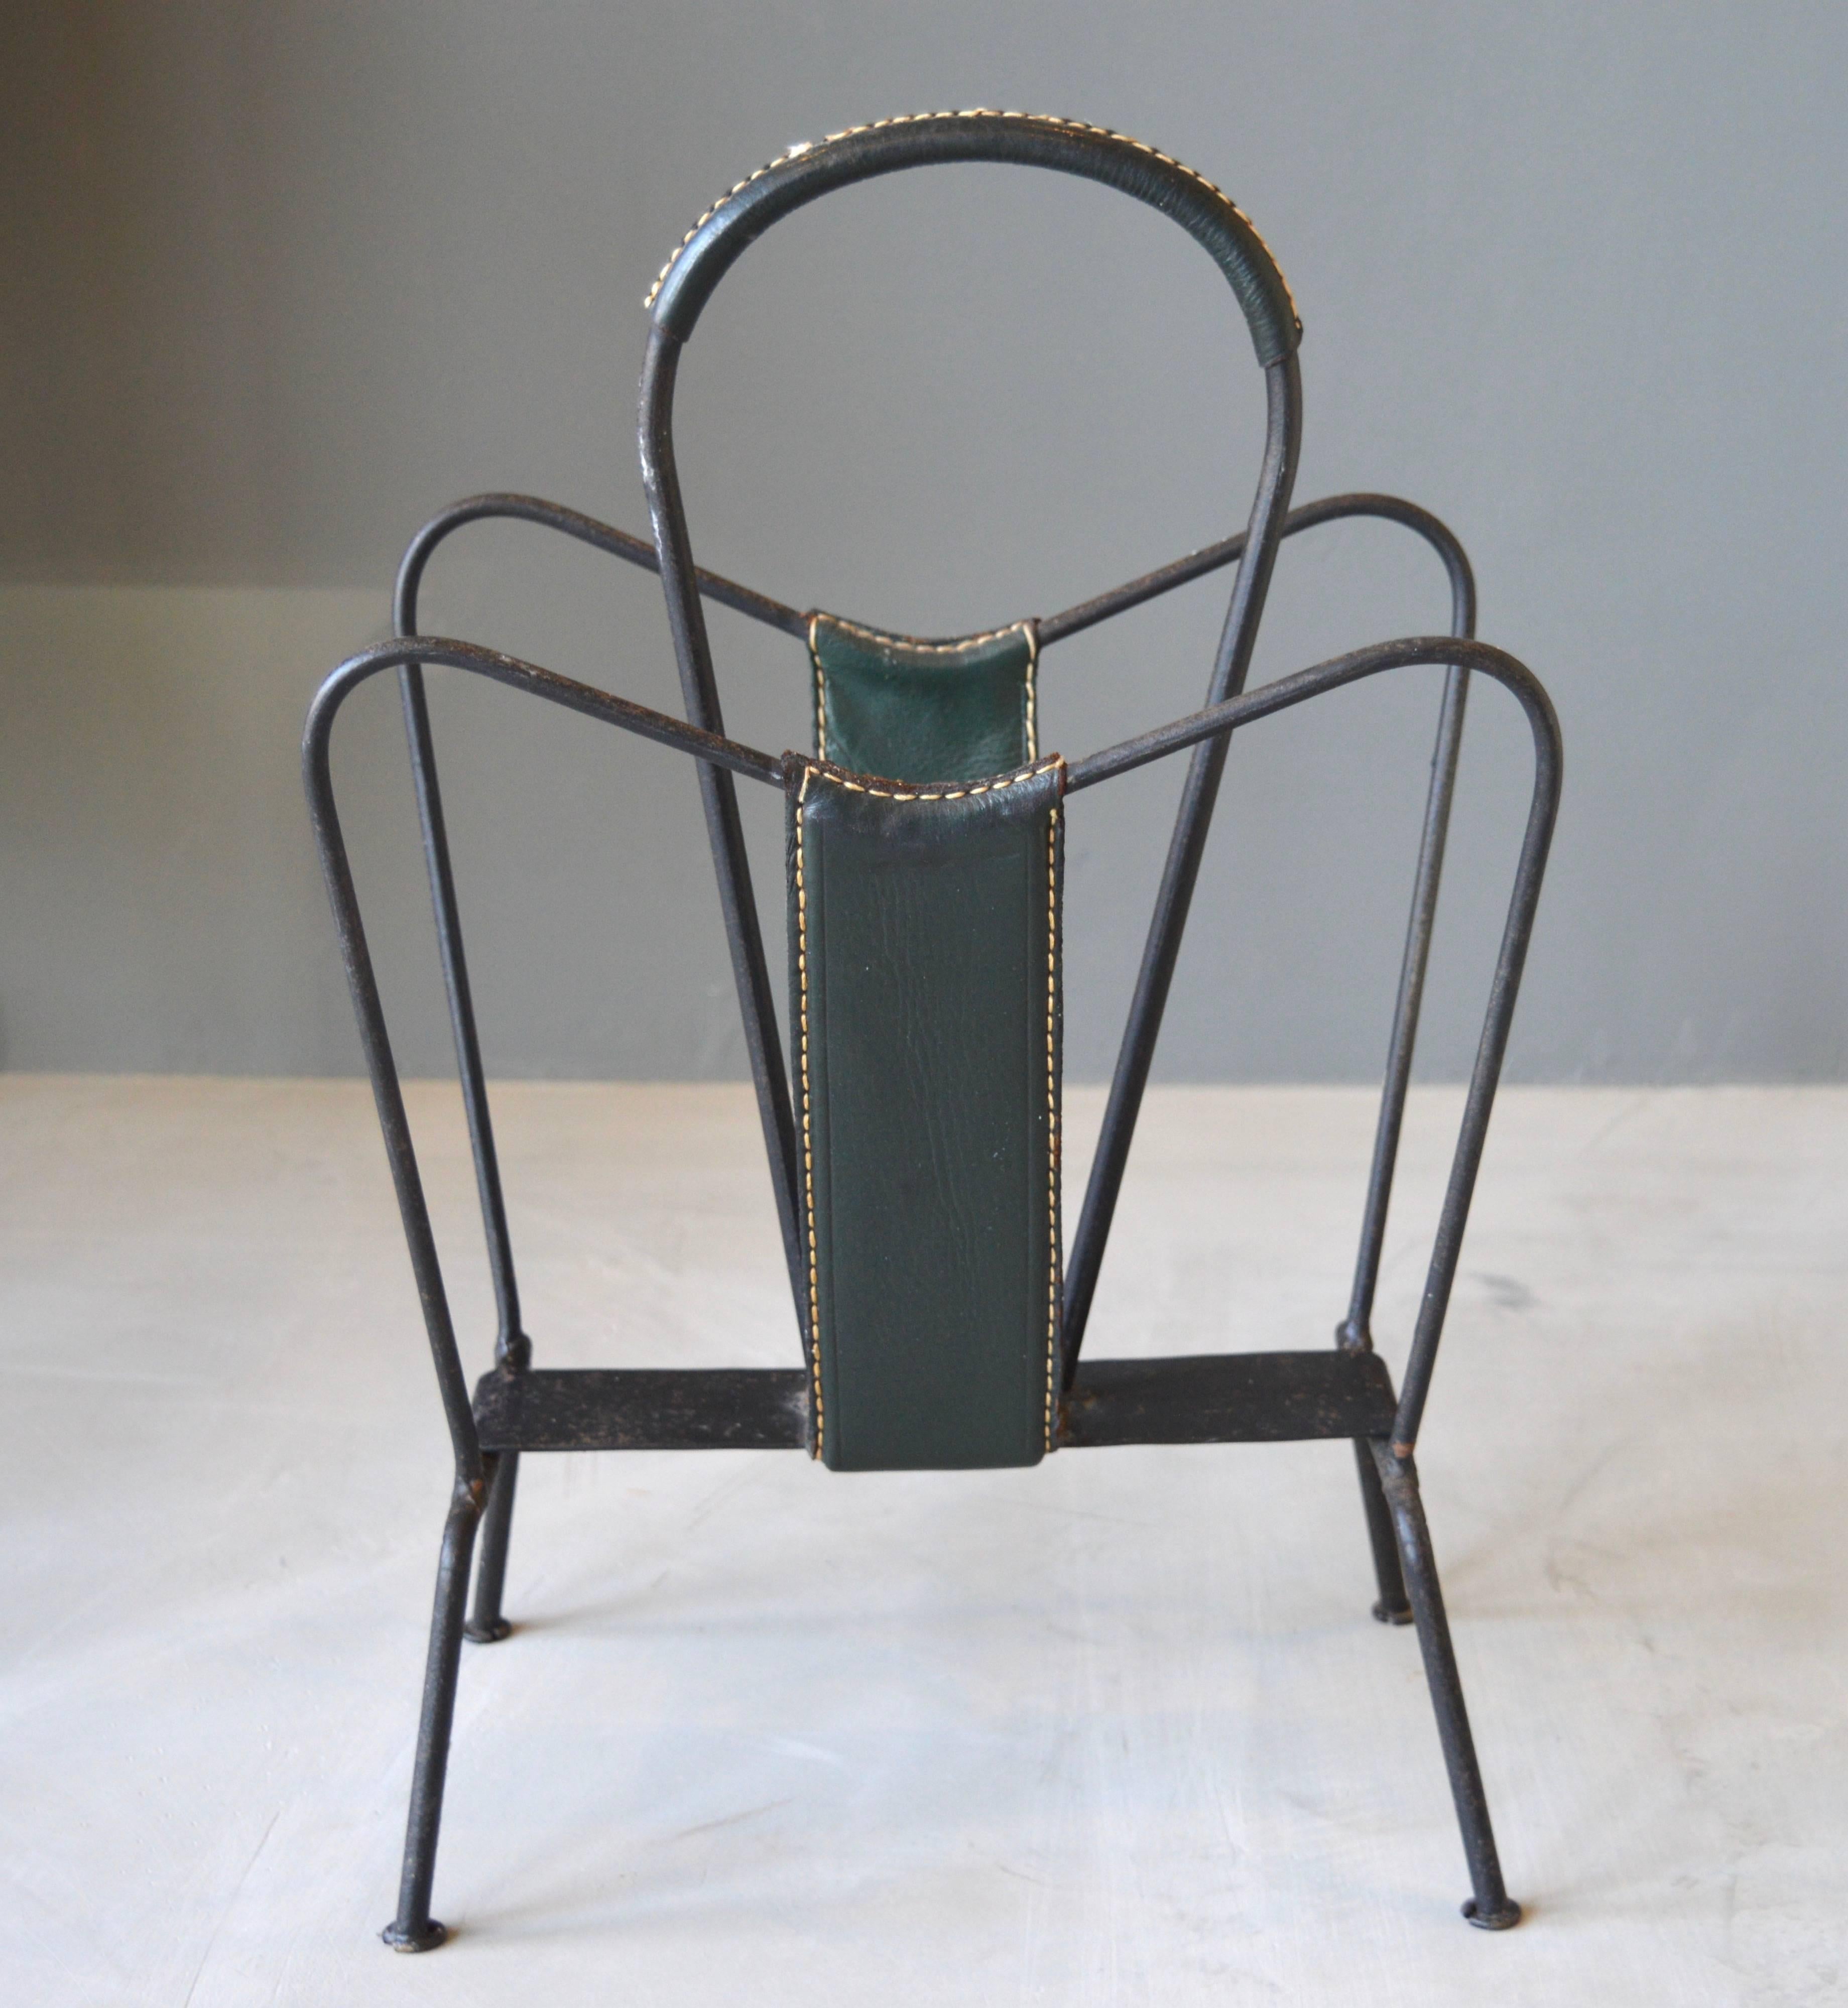 Handsome magazine rack by Jacques Adnet. Iron frame with dark green leather. Signature Adnet contrast stitching. Excellent vintage condition.

Matching magazine rack in yellow leather available in separate listing.